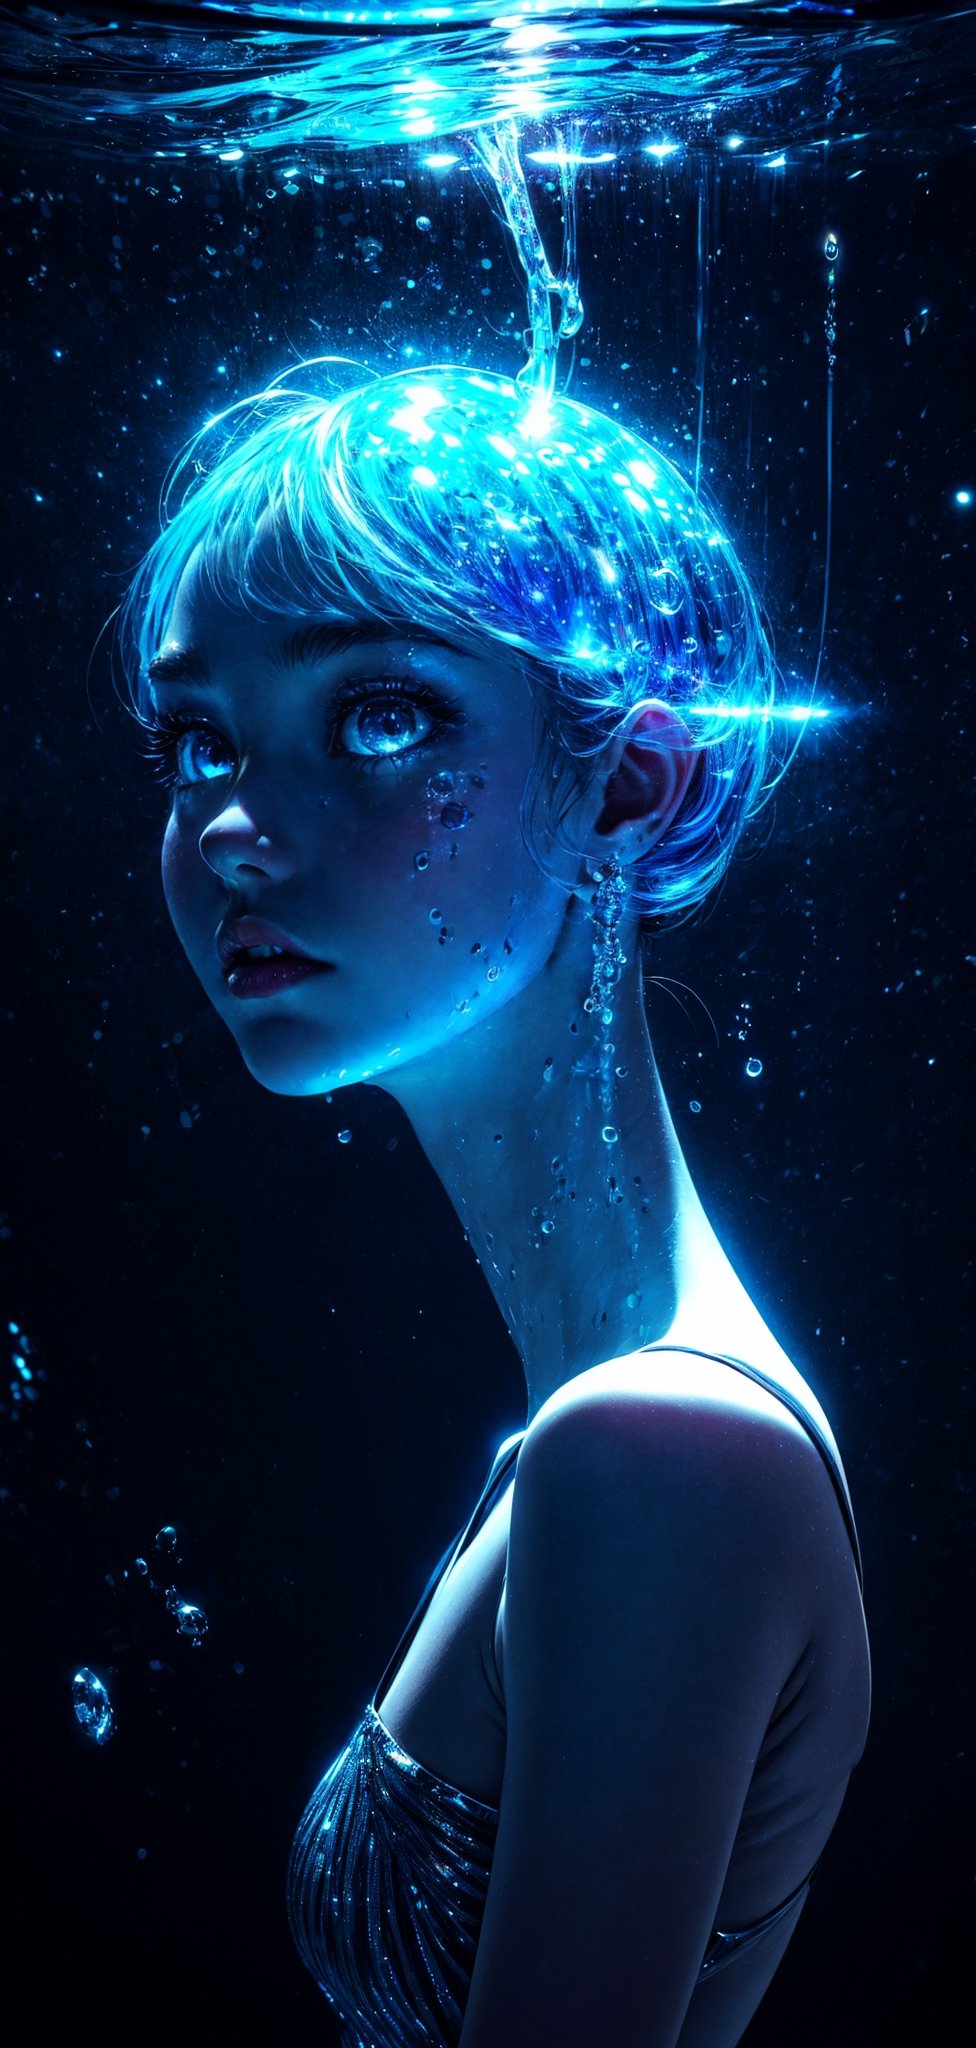 (masterpiece, best quality,4k resolution),
(Mysterious close-shot of a nixie from side), 
Rolando glistening scales reflecting moonlight,
deep blue eyes filled with secrets of the deep galaxy,
water droplets on her skin shimmering like diamonds,
Rolando looks back at the camera,DisembodiedHead